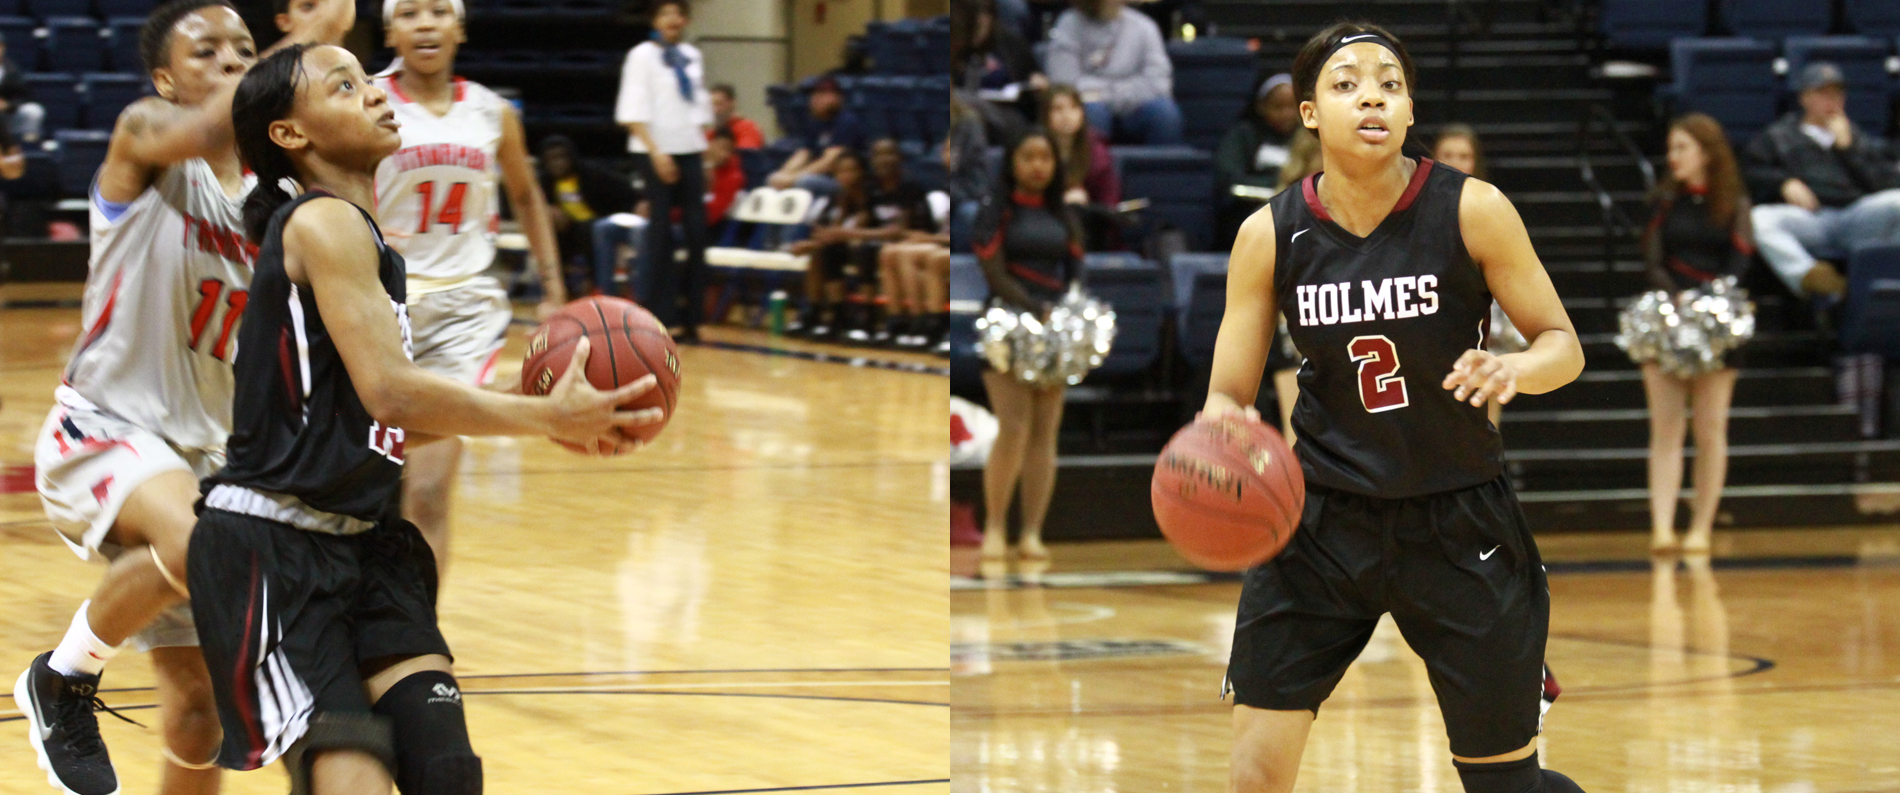 Jones, Collier to represent Holmes in the MACJC All-Star Game on April 12